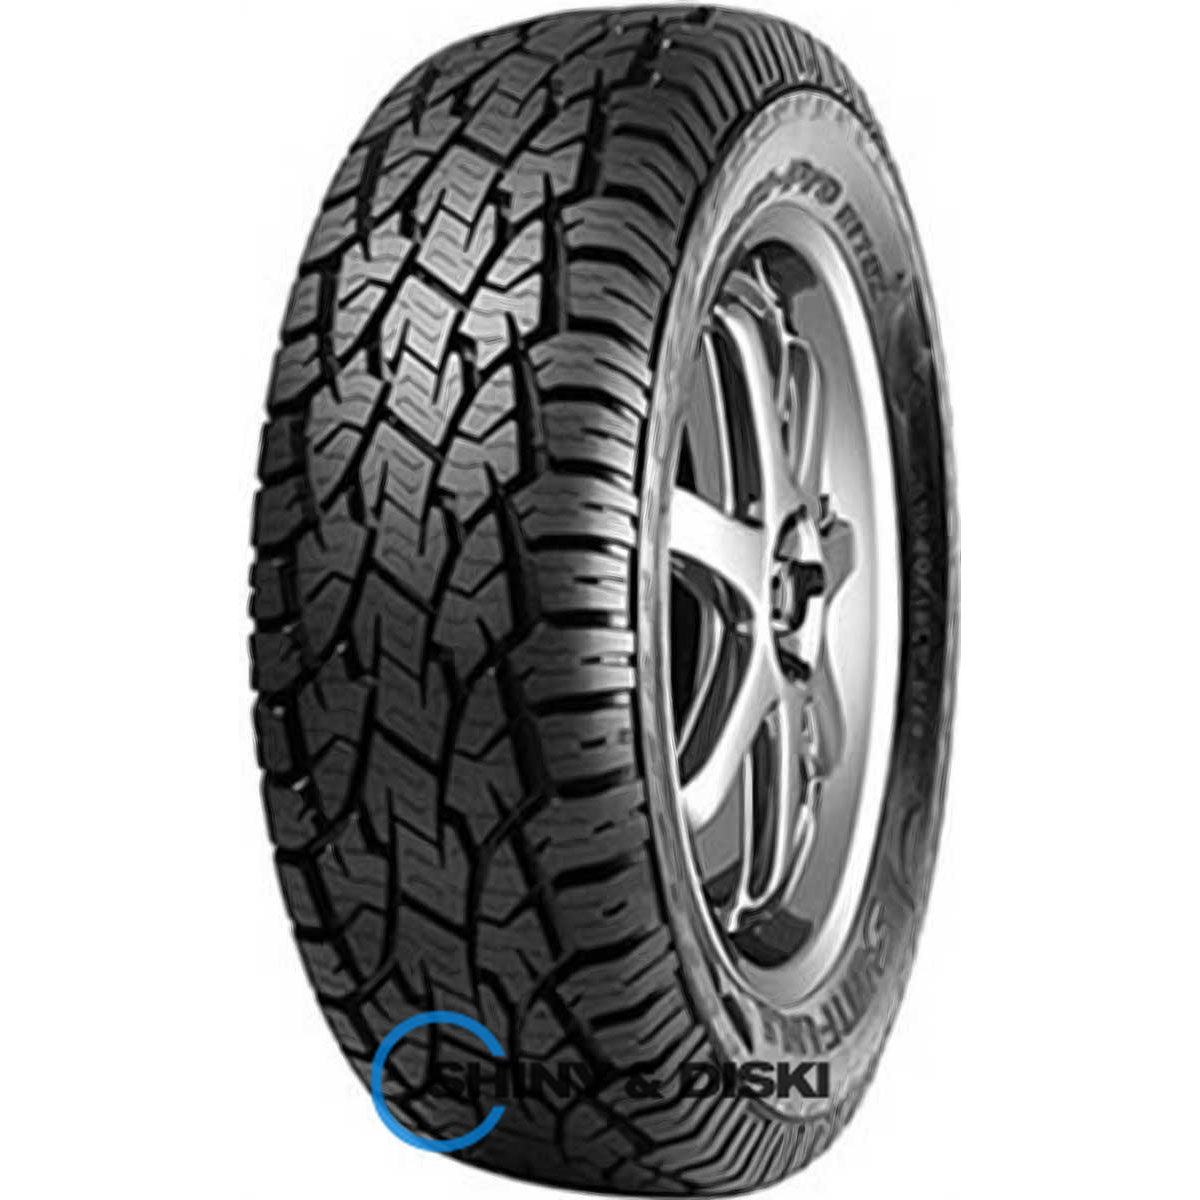 sunfull mont-pro at782 235/85 r16 120/116r